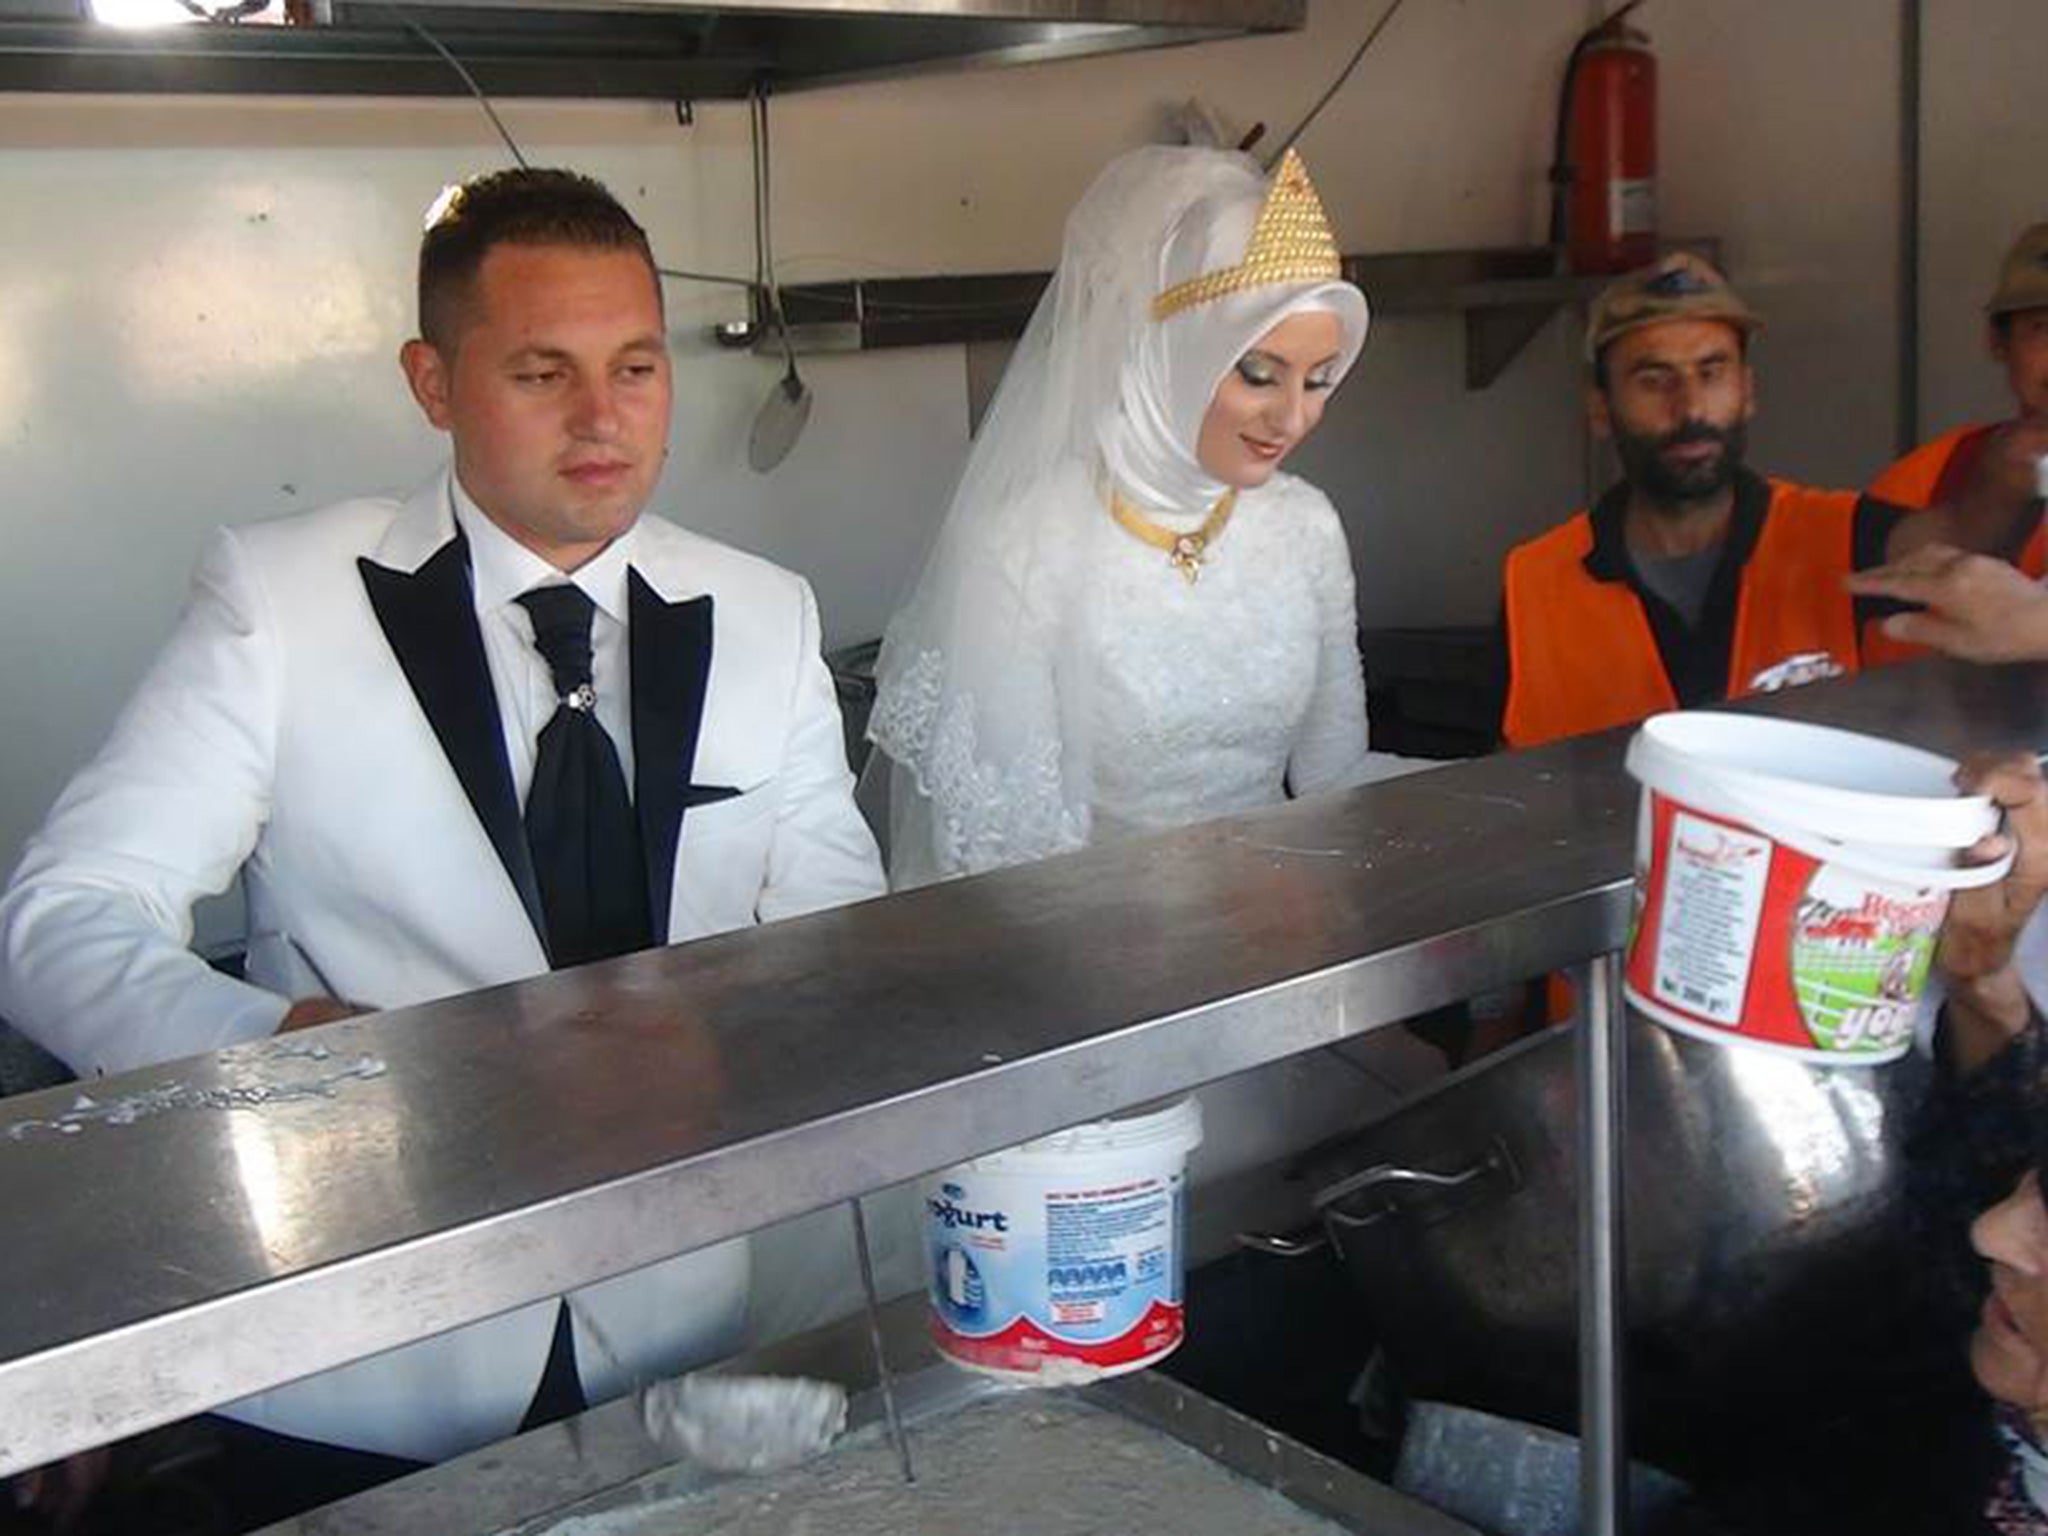 Bride Esra Polat said that she was shocked when her fiance first floated his father’s wedding day idea